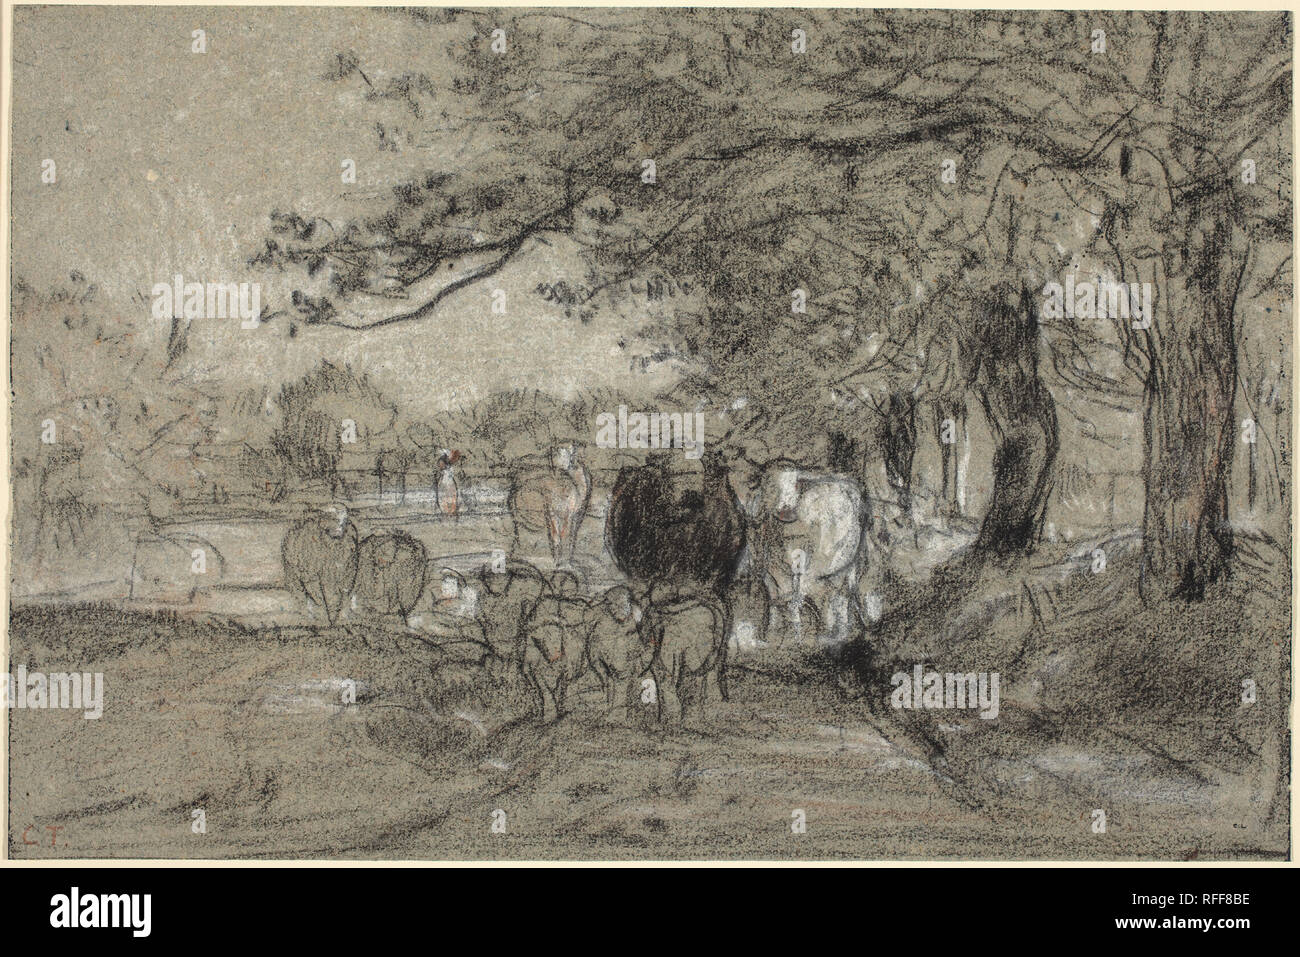 Cows Under Trees. Dimensions: sheet: 21.1 x 31.7 cm (8 5/16 x 12 1/2 in.). Medium: charcoal, with white and orange chalk on blue-gray laid paper. Museum: National Gallery of Art, Washington DC. Author: CONSTANT TROYON. Stock Photo